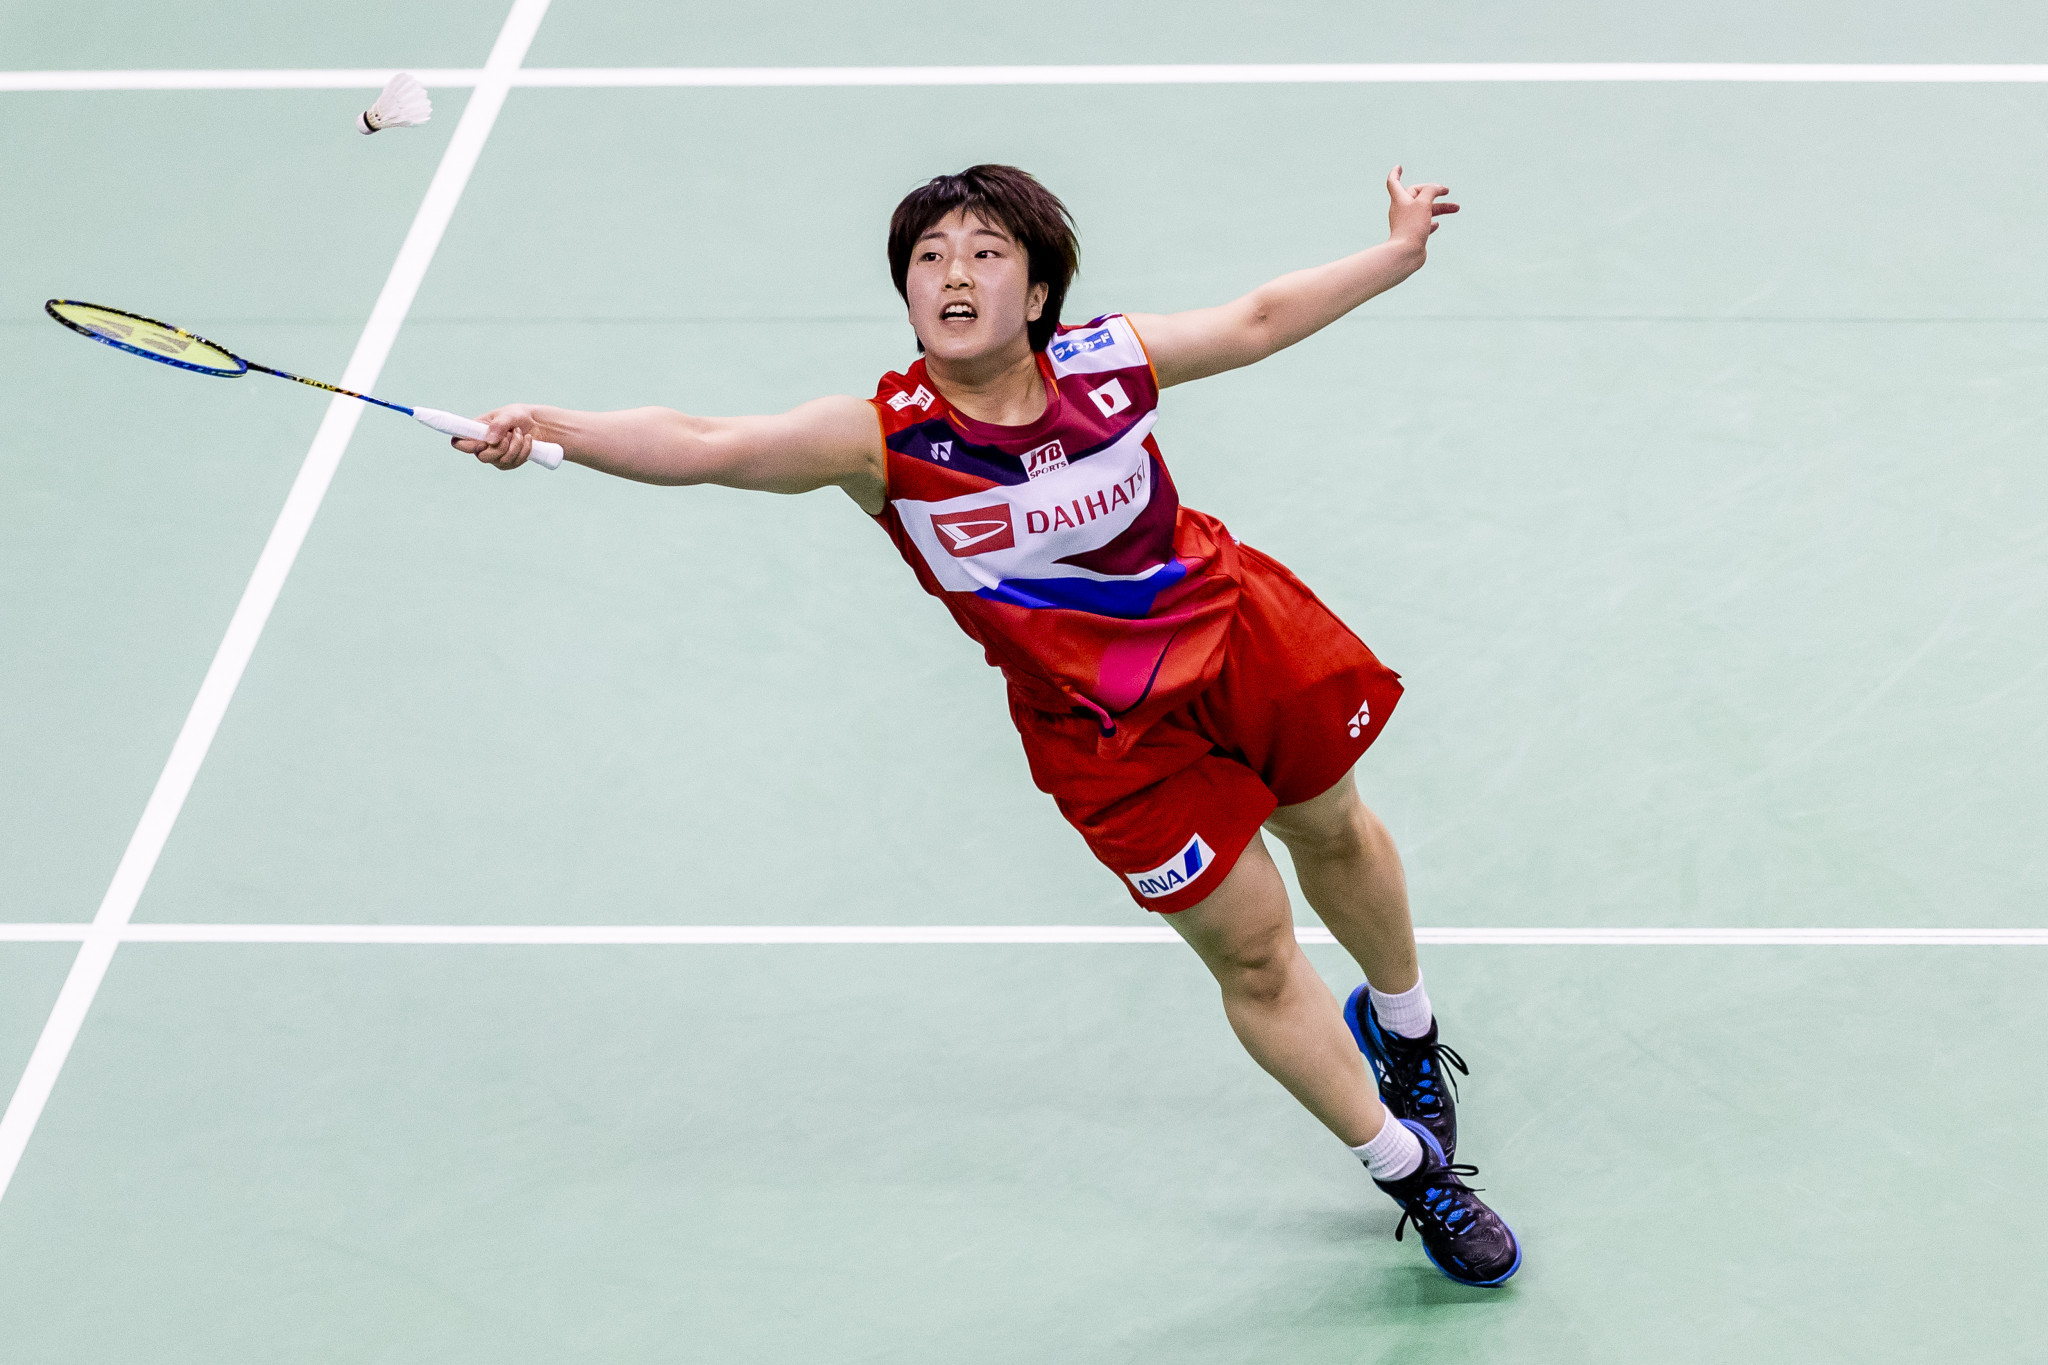 Akane Yamaguchi is continuing her rich vein of form ©Getty Images